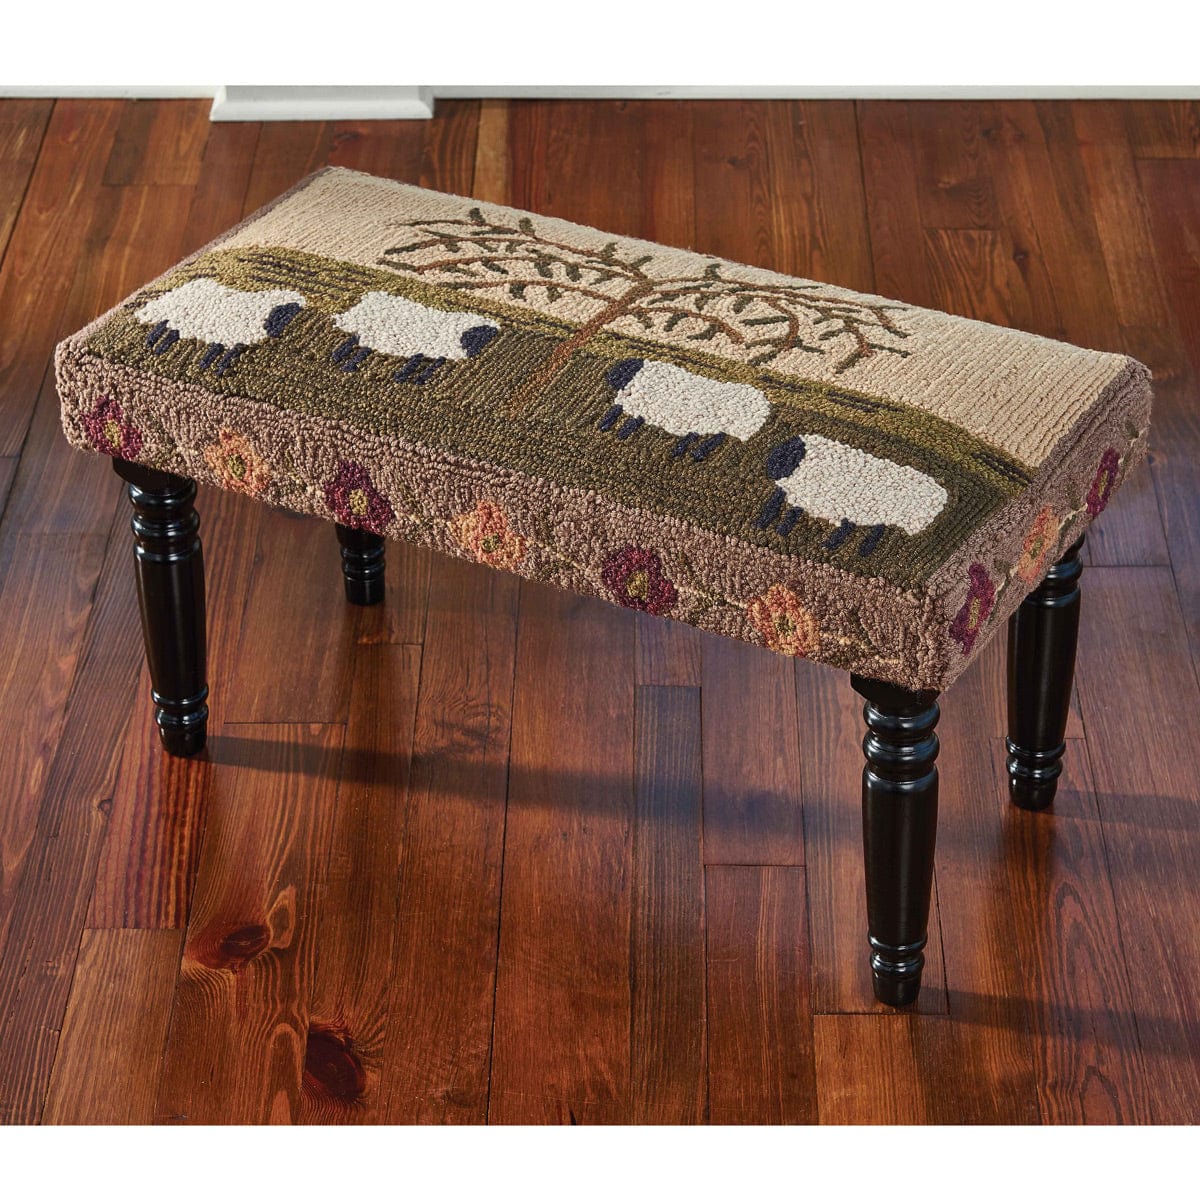 Willow & Sheep Hooked Bench 16" x 32" Rectangle-Park Designs-The Village Merchant